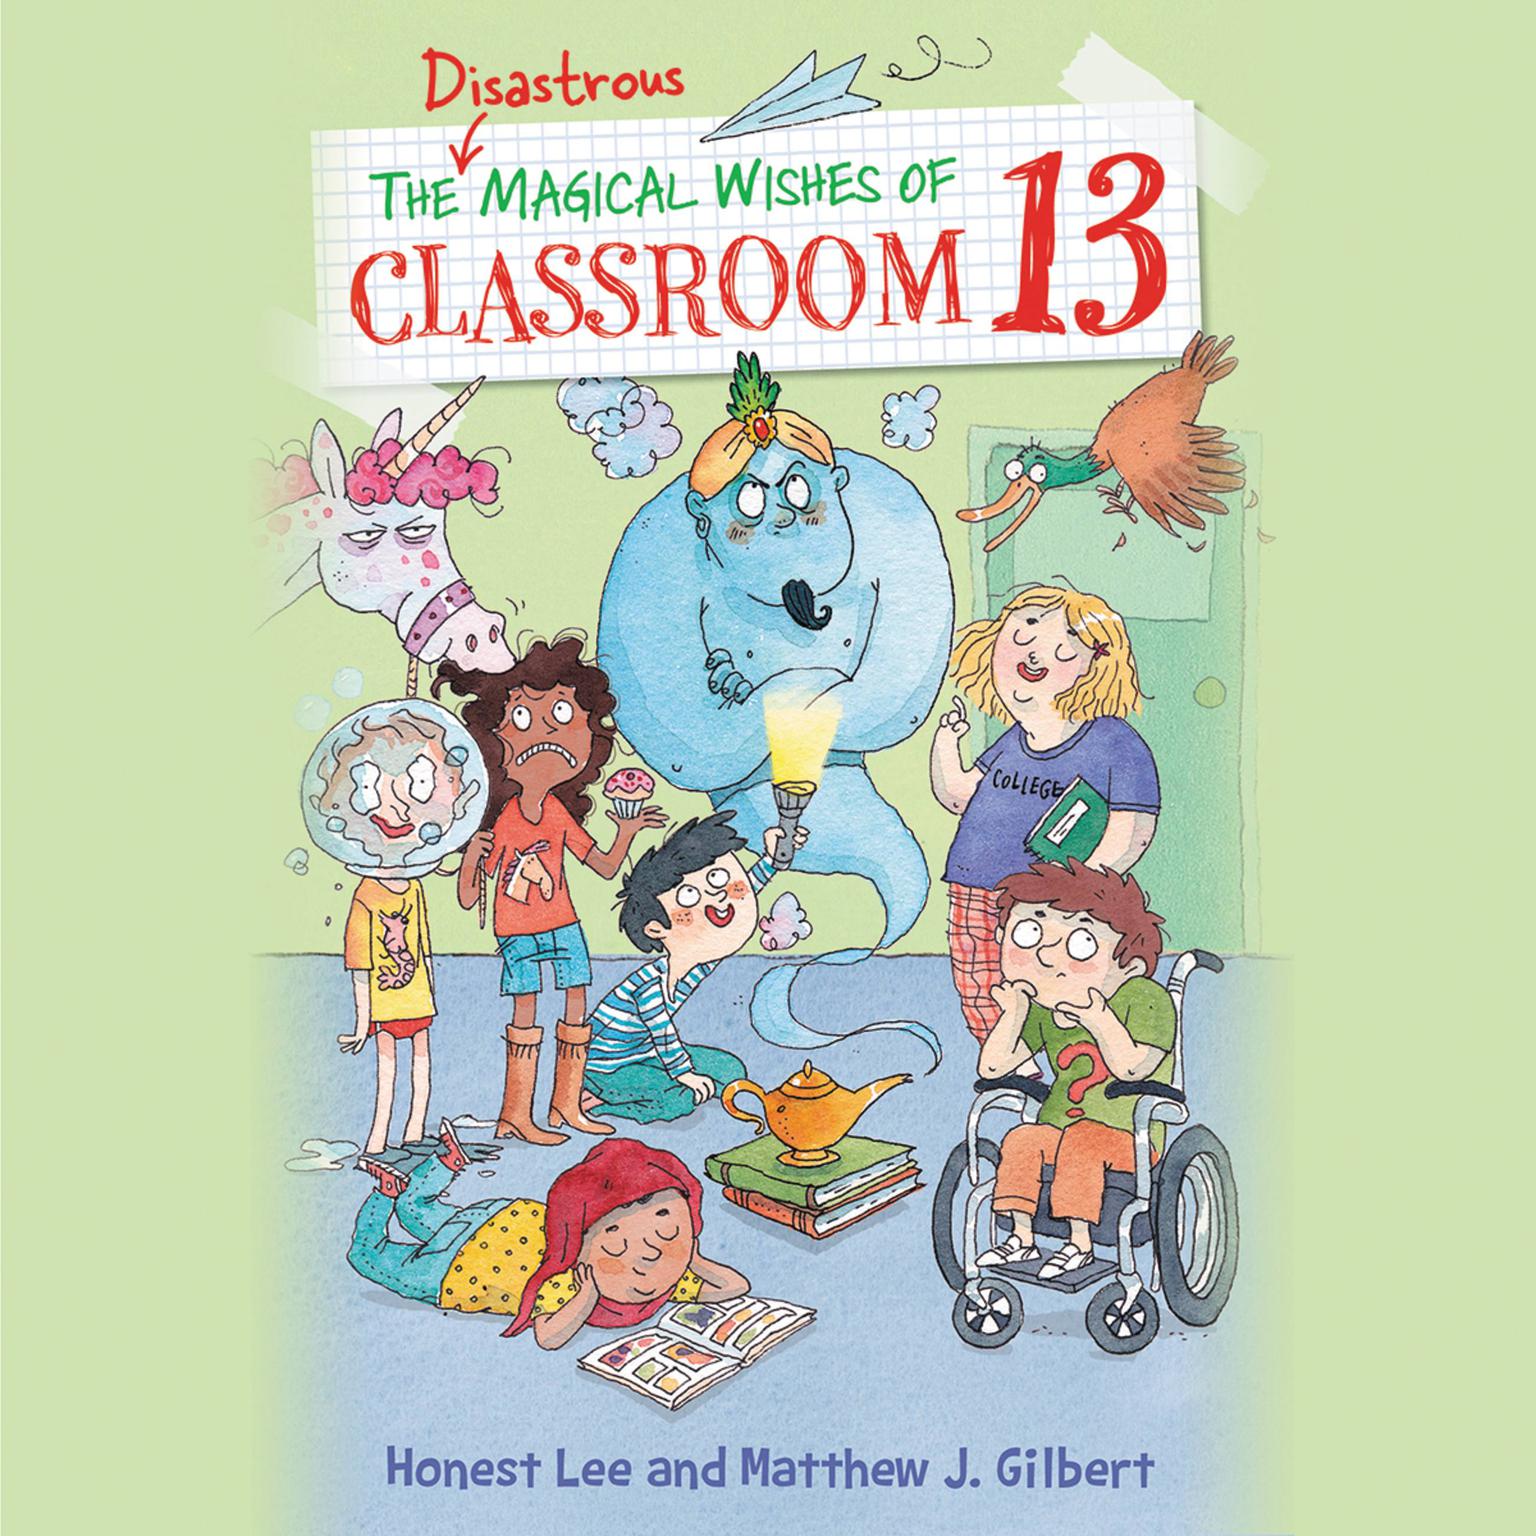 The Disastrous Magical Wishes of Classroom 13 Audiobook, by Honest Lee